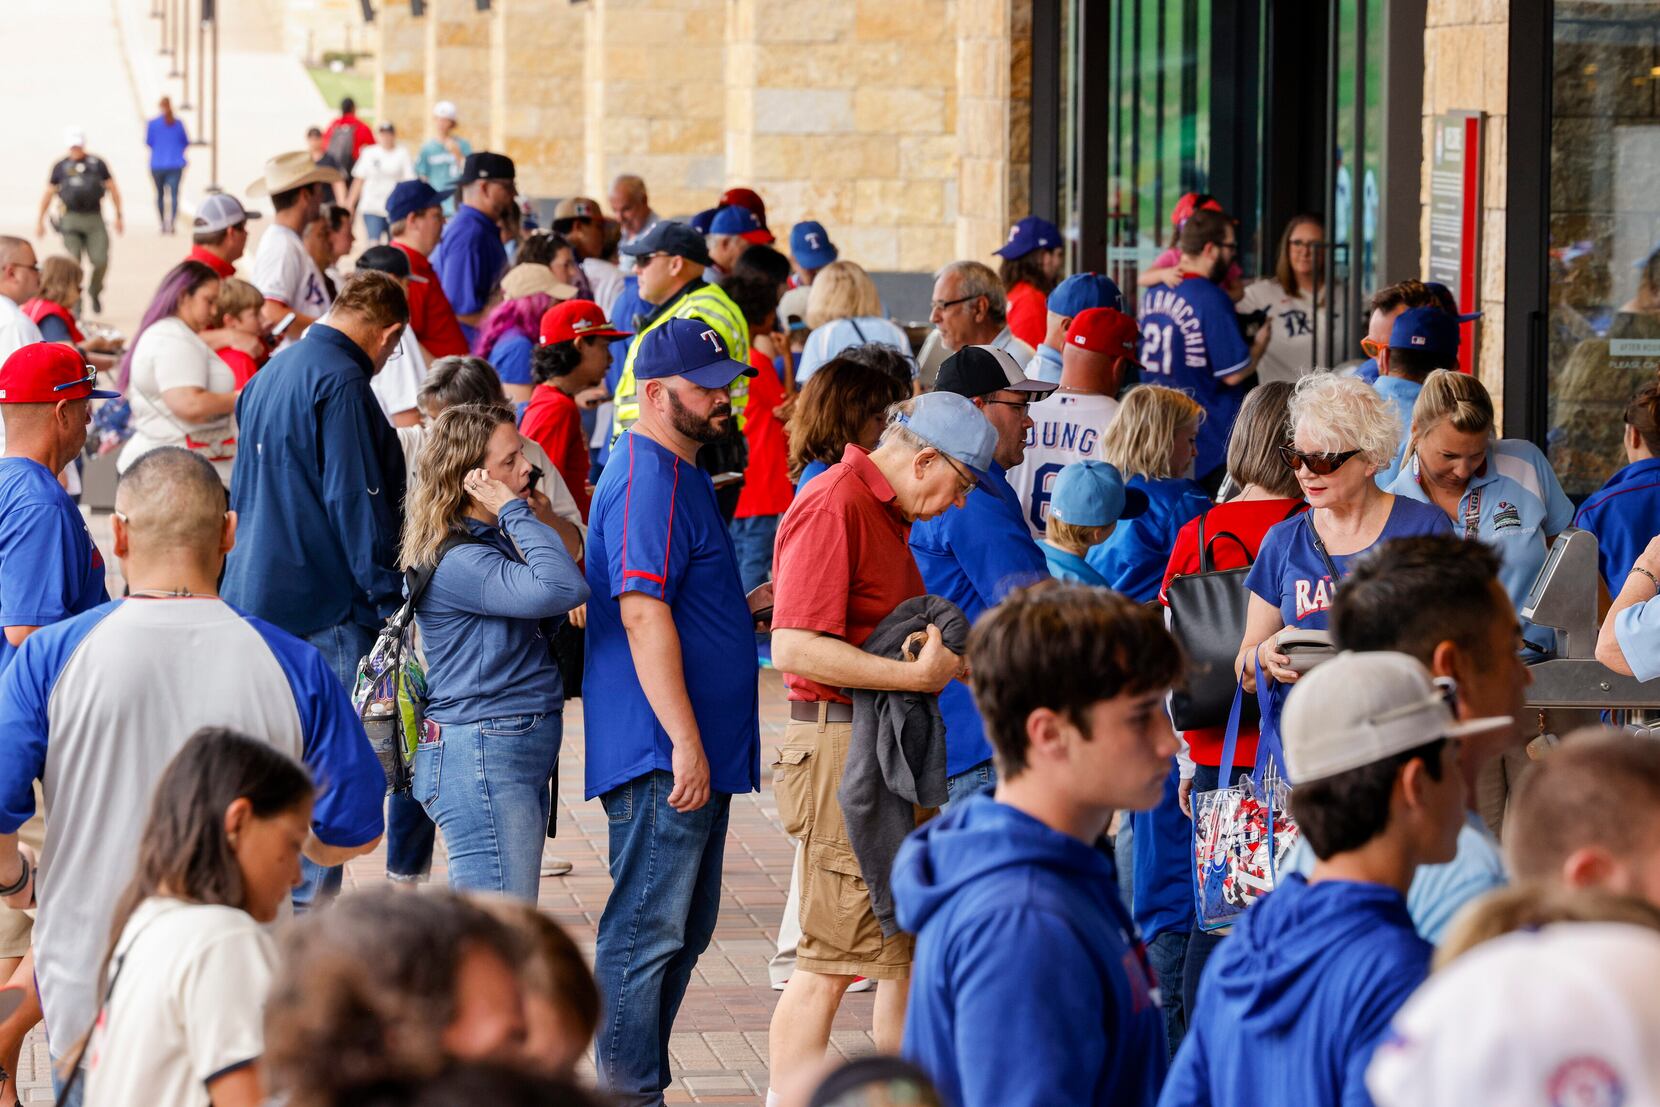 Fans excited as Texas Rangers prepare for first playoff game at